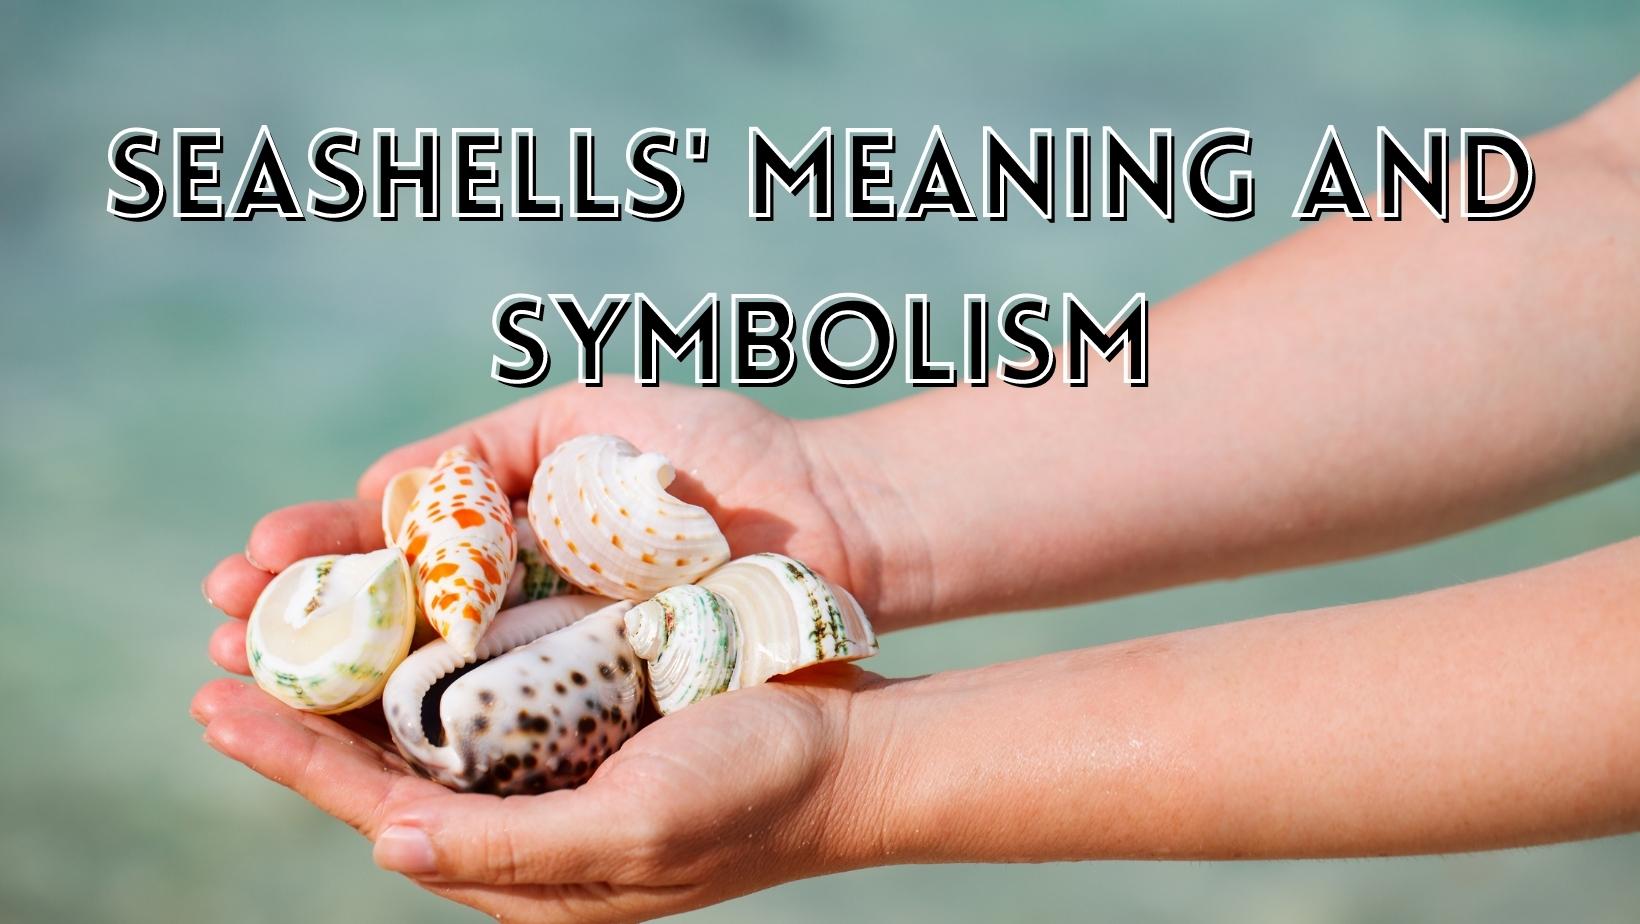 Seashells' Meaning and Symbolism